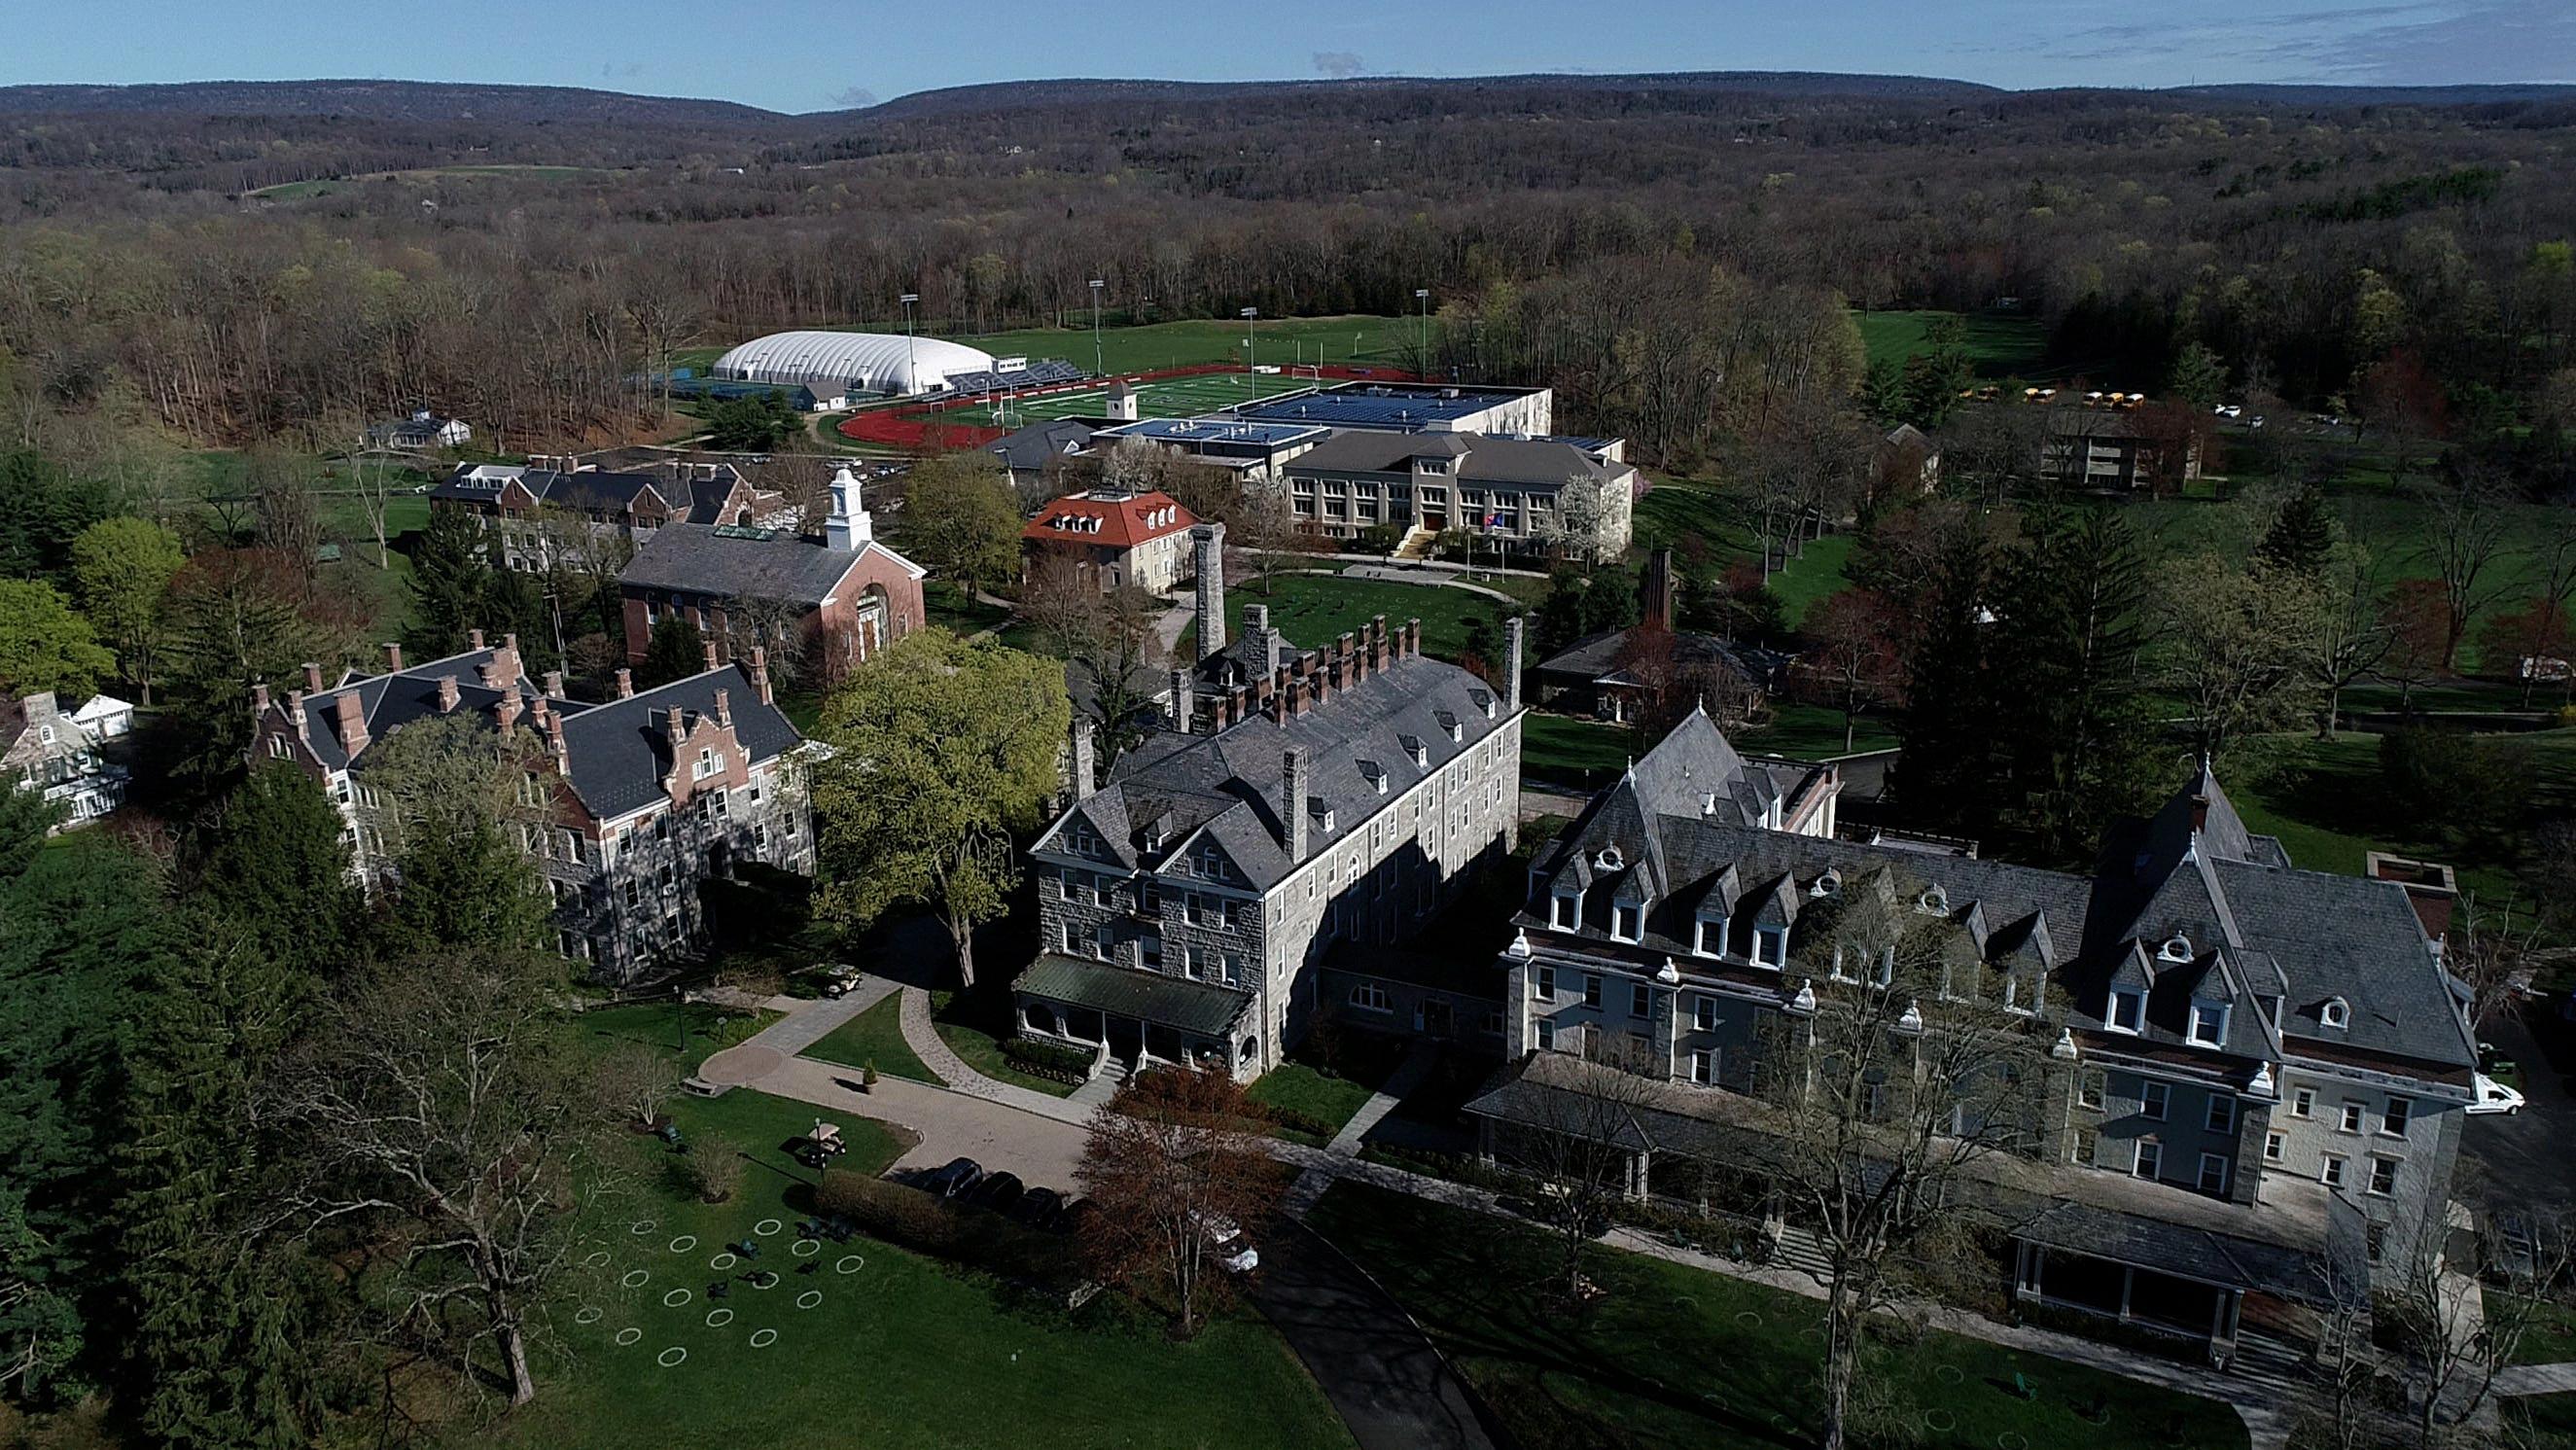 Blair Academy: Education Tuition and Beyond